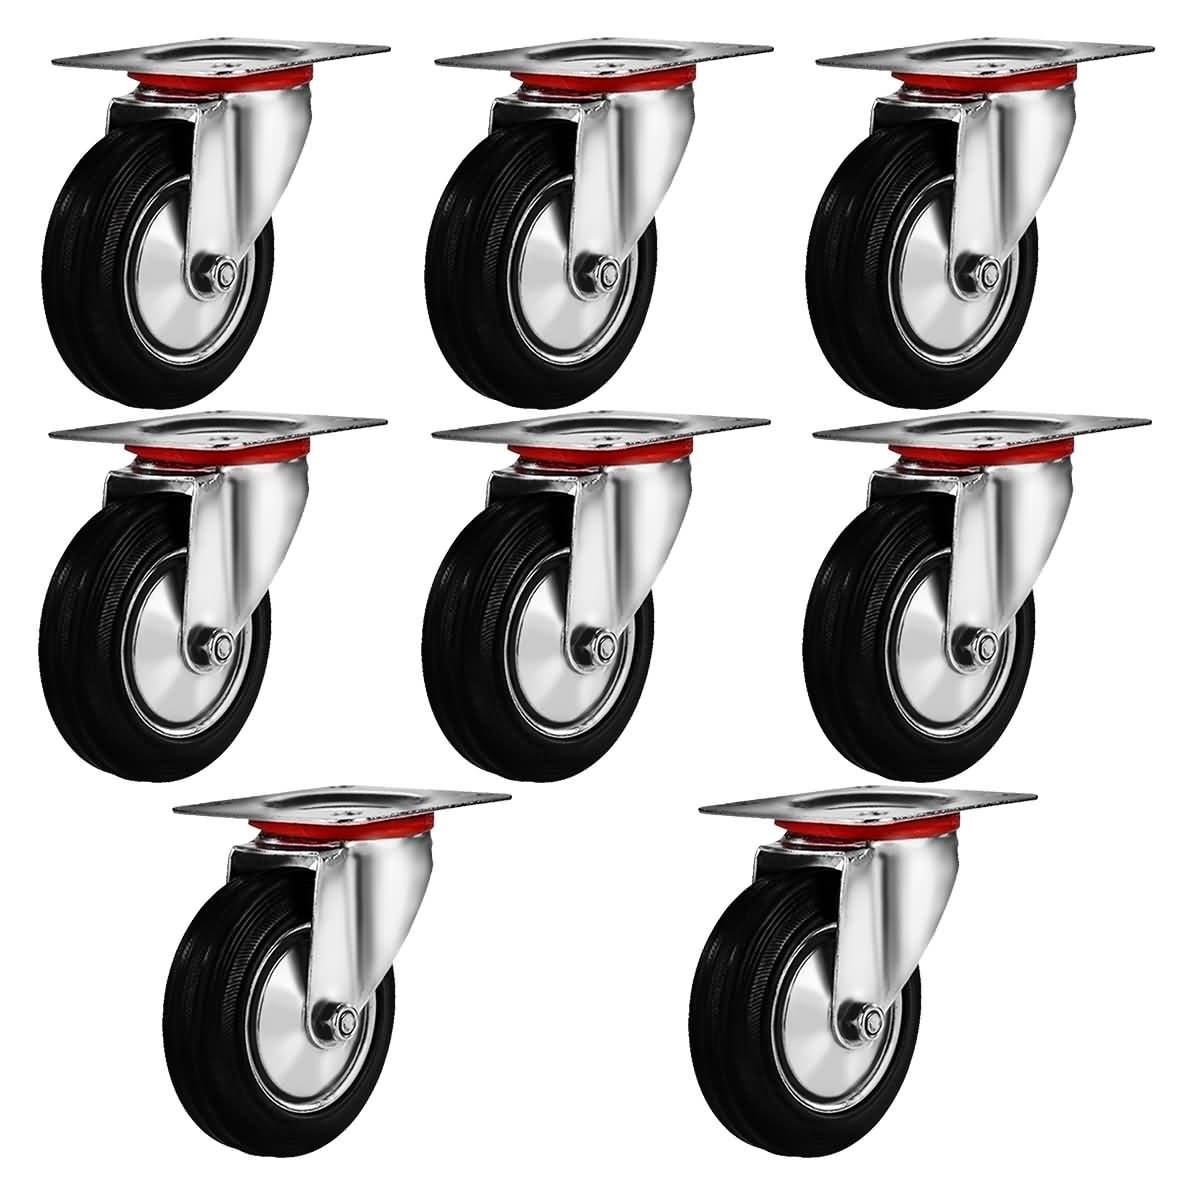 4" 100mm Swivel Castor Rubber Wheel Trolley Caster Furniture Movers 1 Pack 